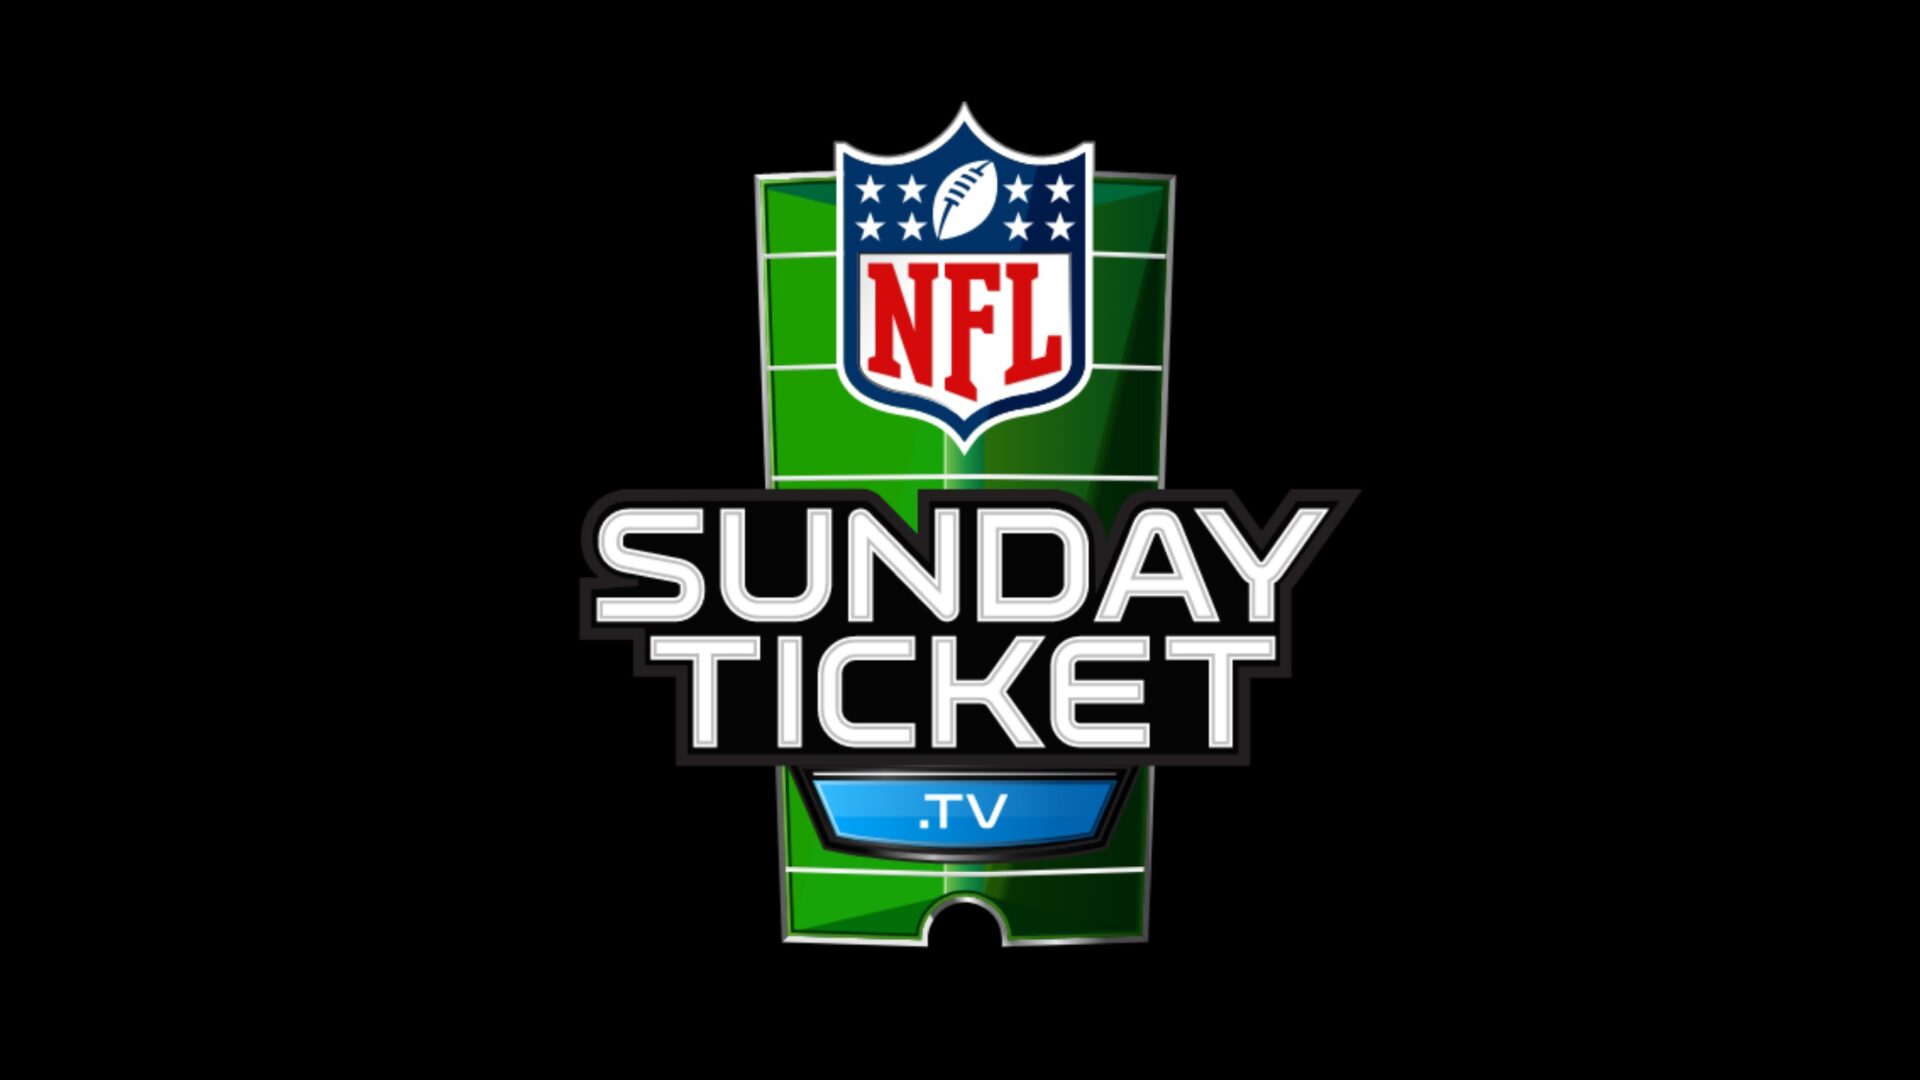 YouTube Scores Touchdown with NFL Sunday Ticket, Apple Steps Out of